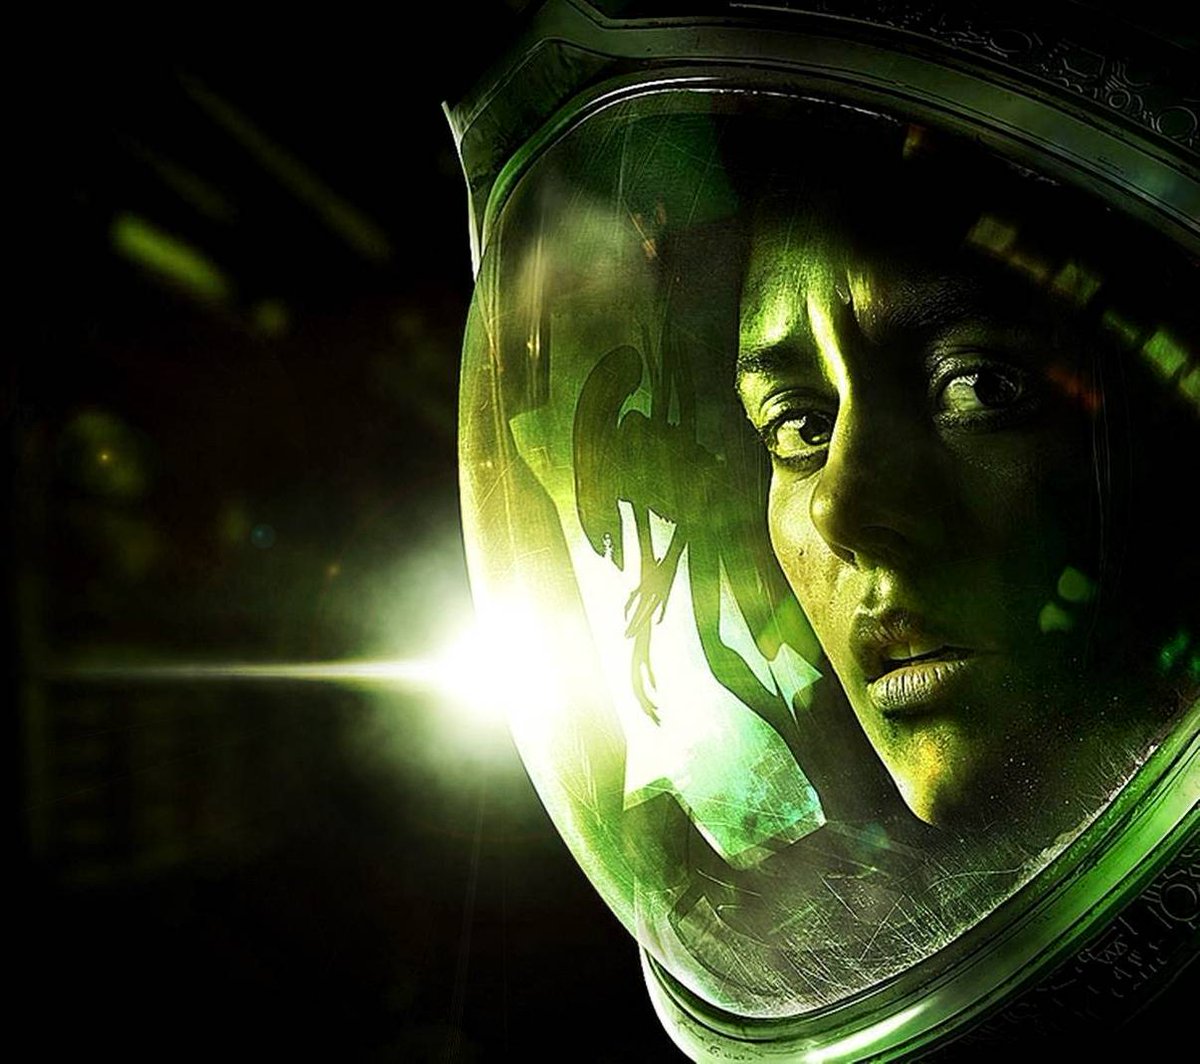 Today marks the 9th anniversary of the release of Alien: Isolation, a game considered by most within the fandom to be a pinnacle of what the Alien franchise has to offer! #AlienIsolation #AmandaRipley #Alien #Aliens #Xenomorph #XenomorphXX121 #CreativeAssembly